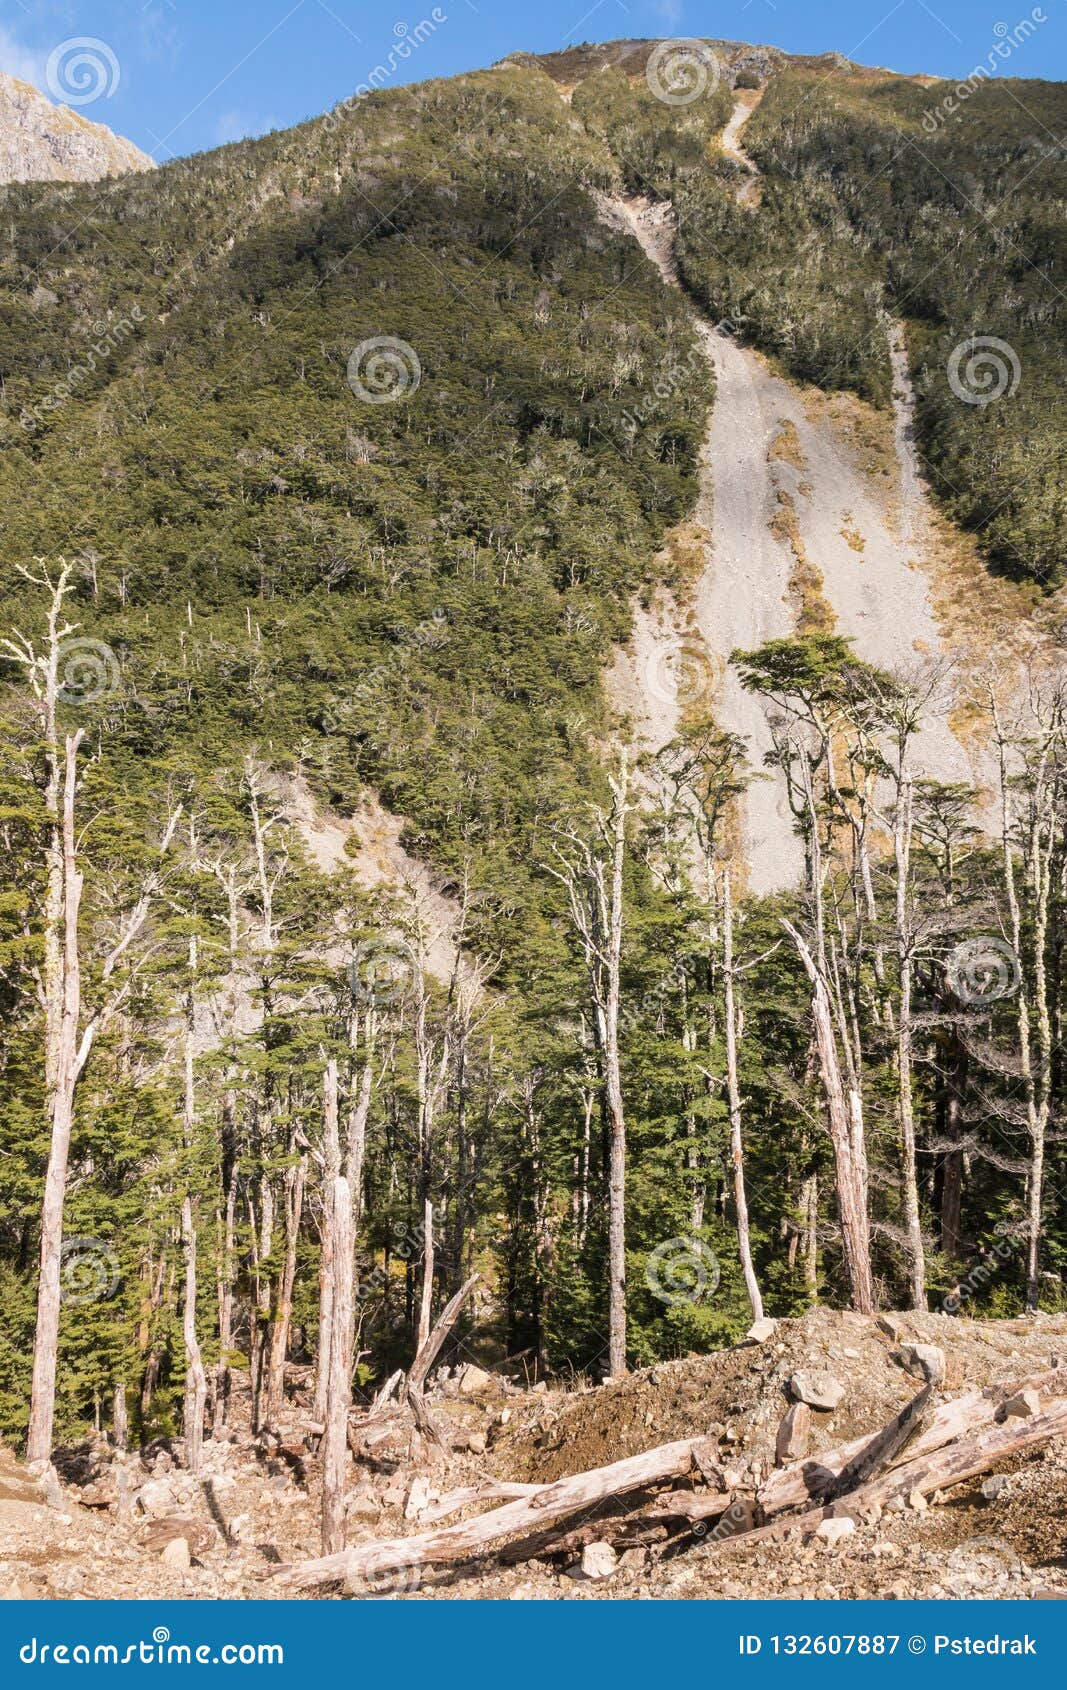 souther beech forest in southern alps in new zealand